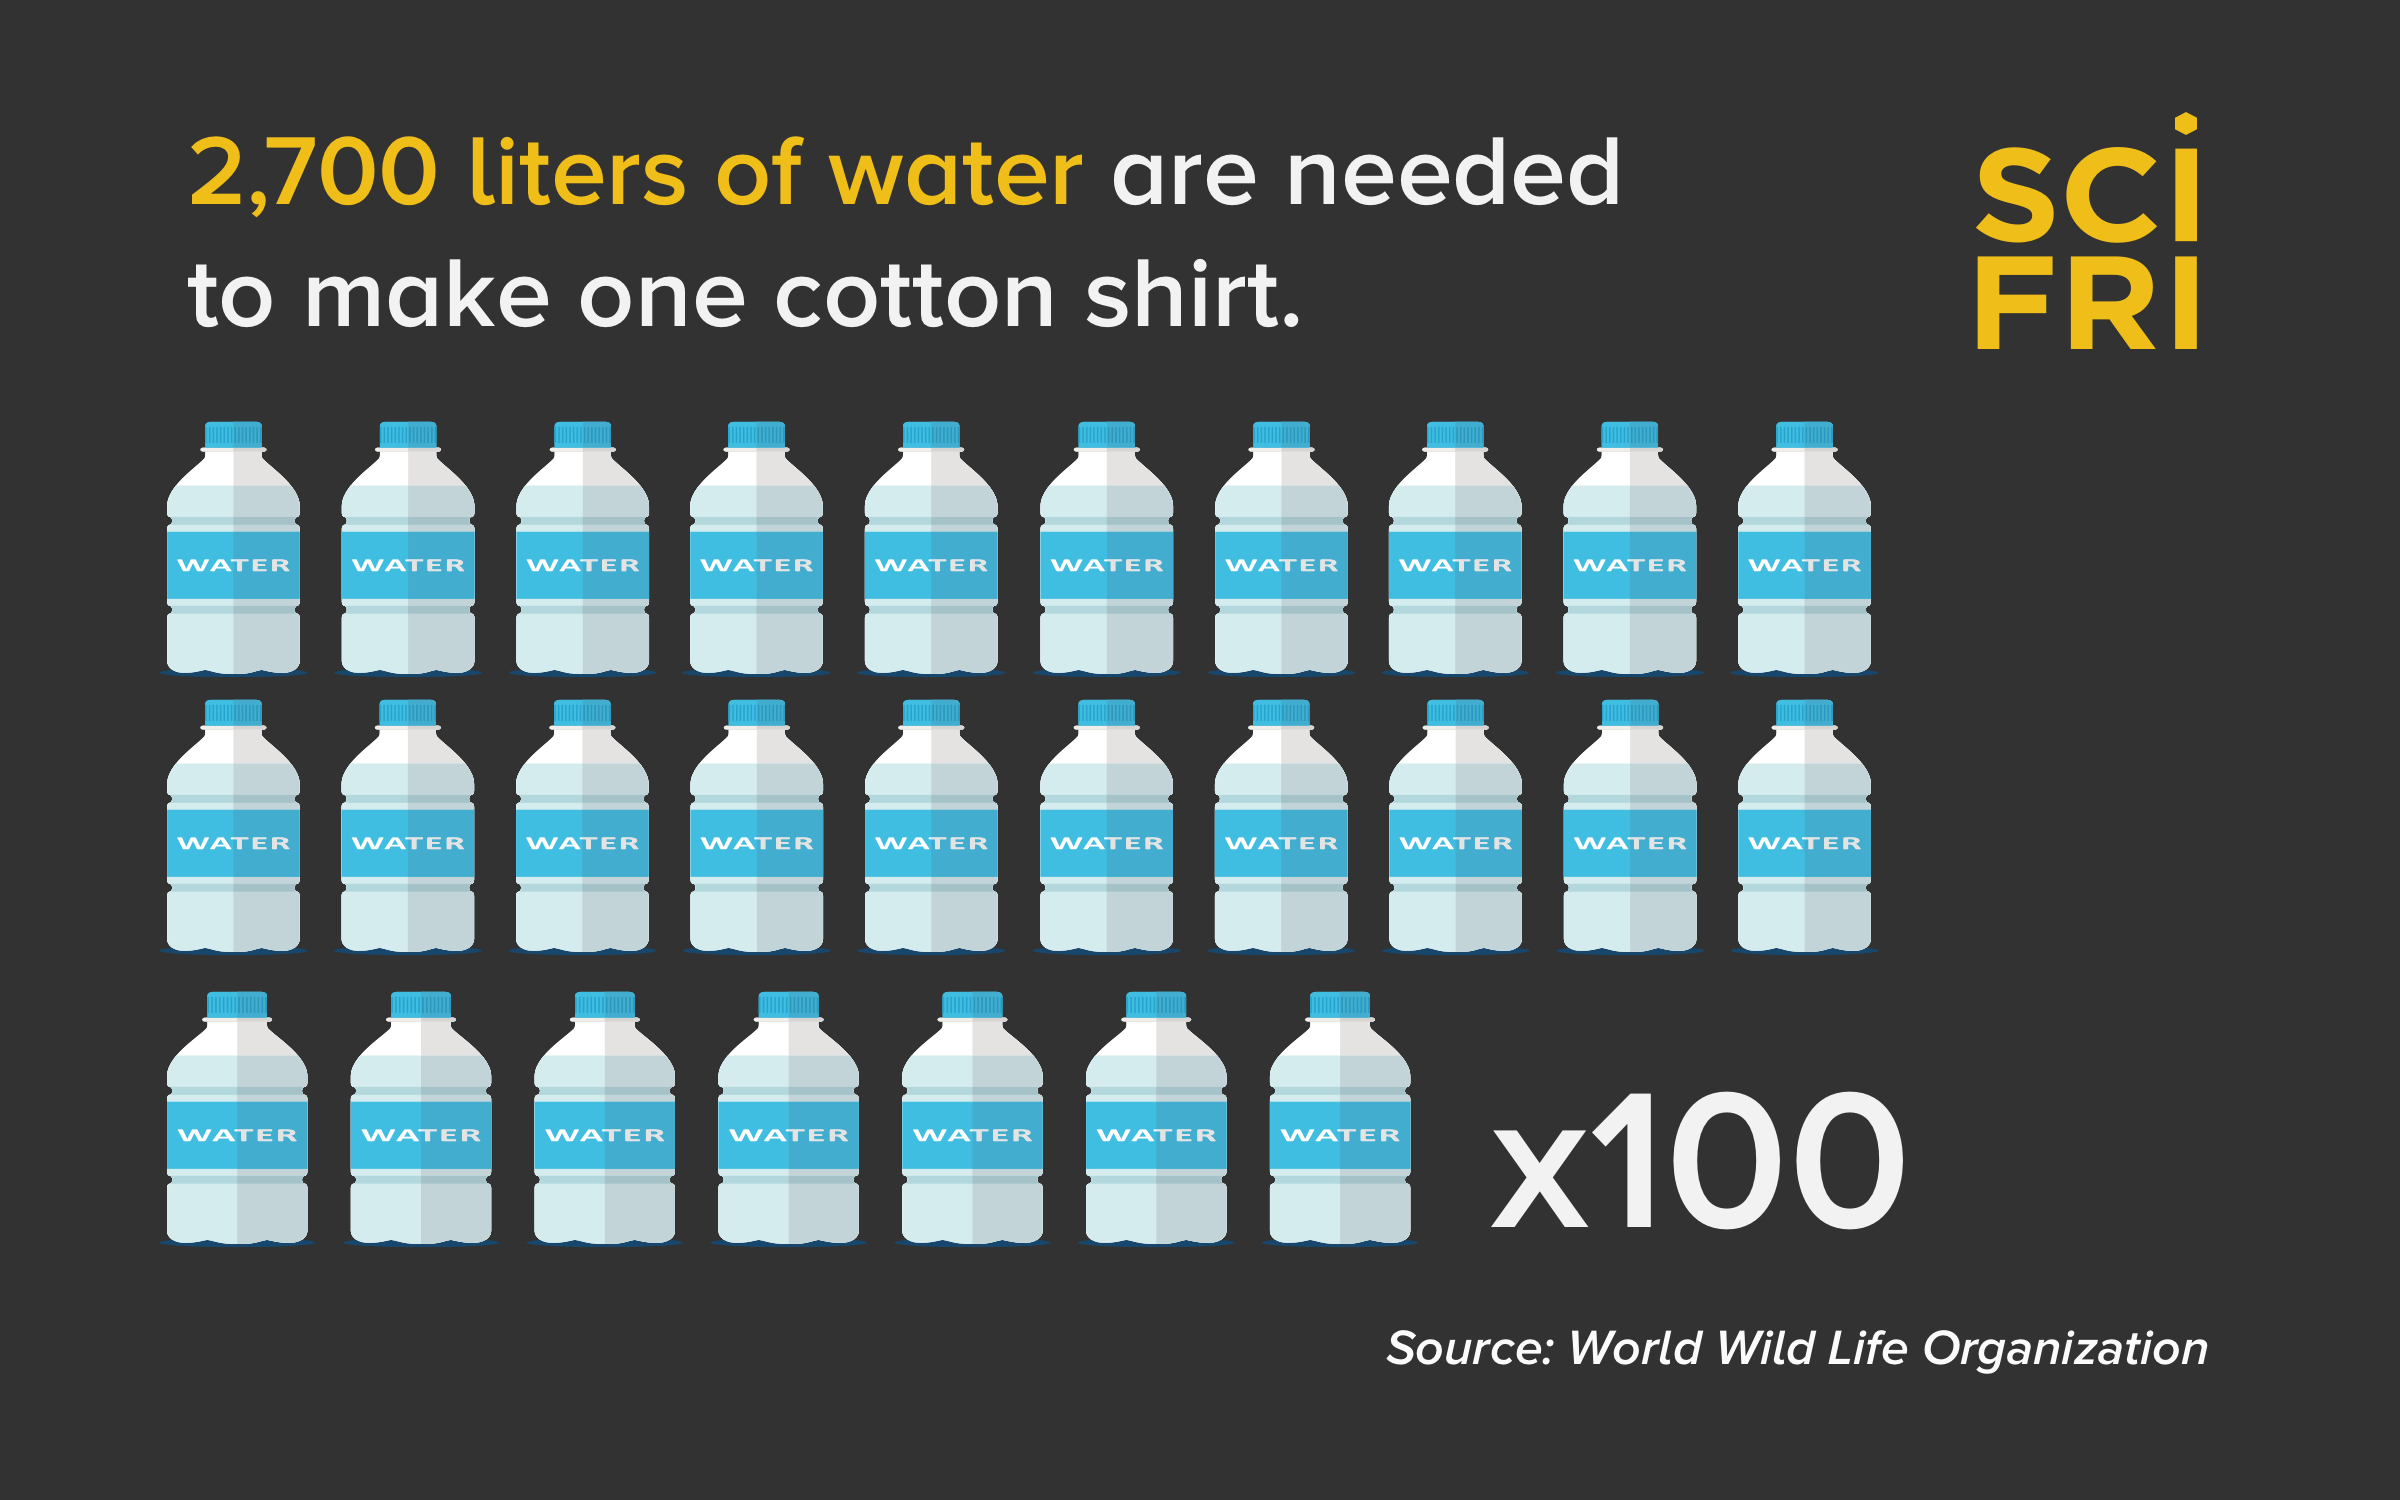 27 cartoon water bottles lined up in a row with a "x100" next to it and text that says "2,700 liters of water are needed to make one cotton shirt" against a black background